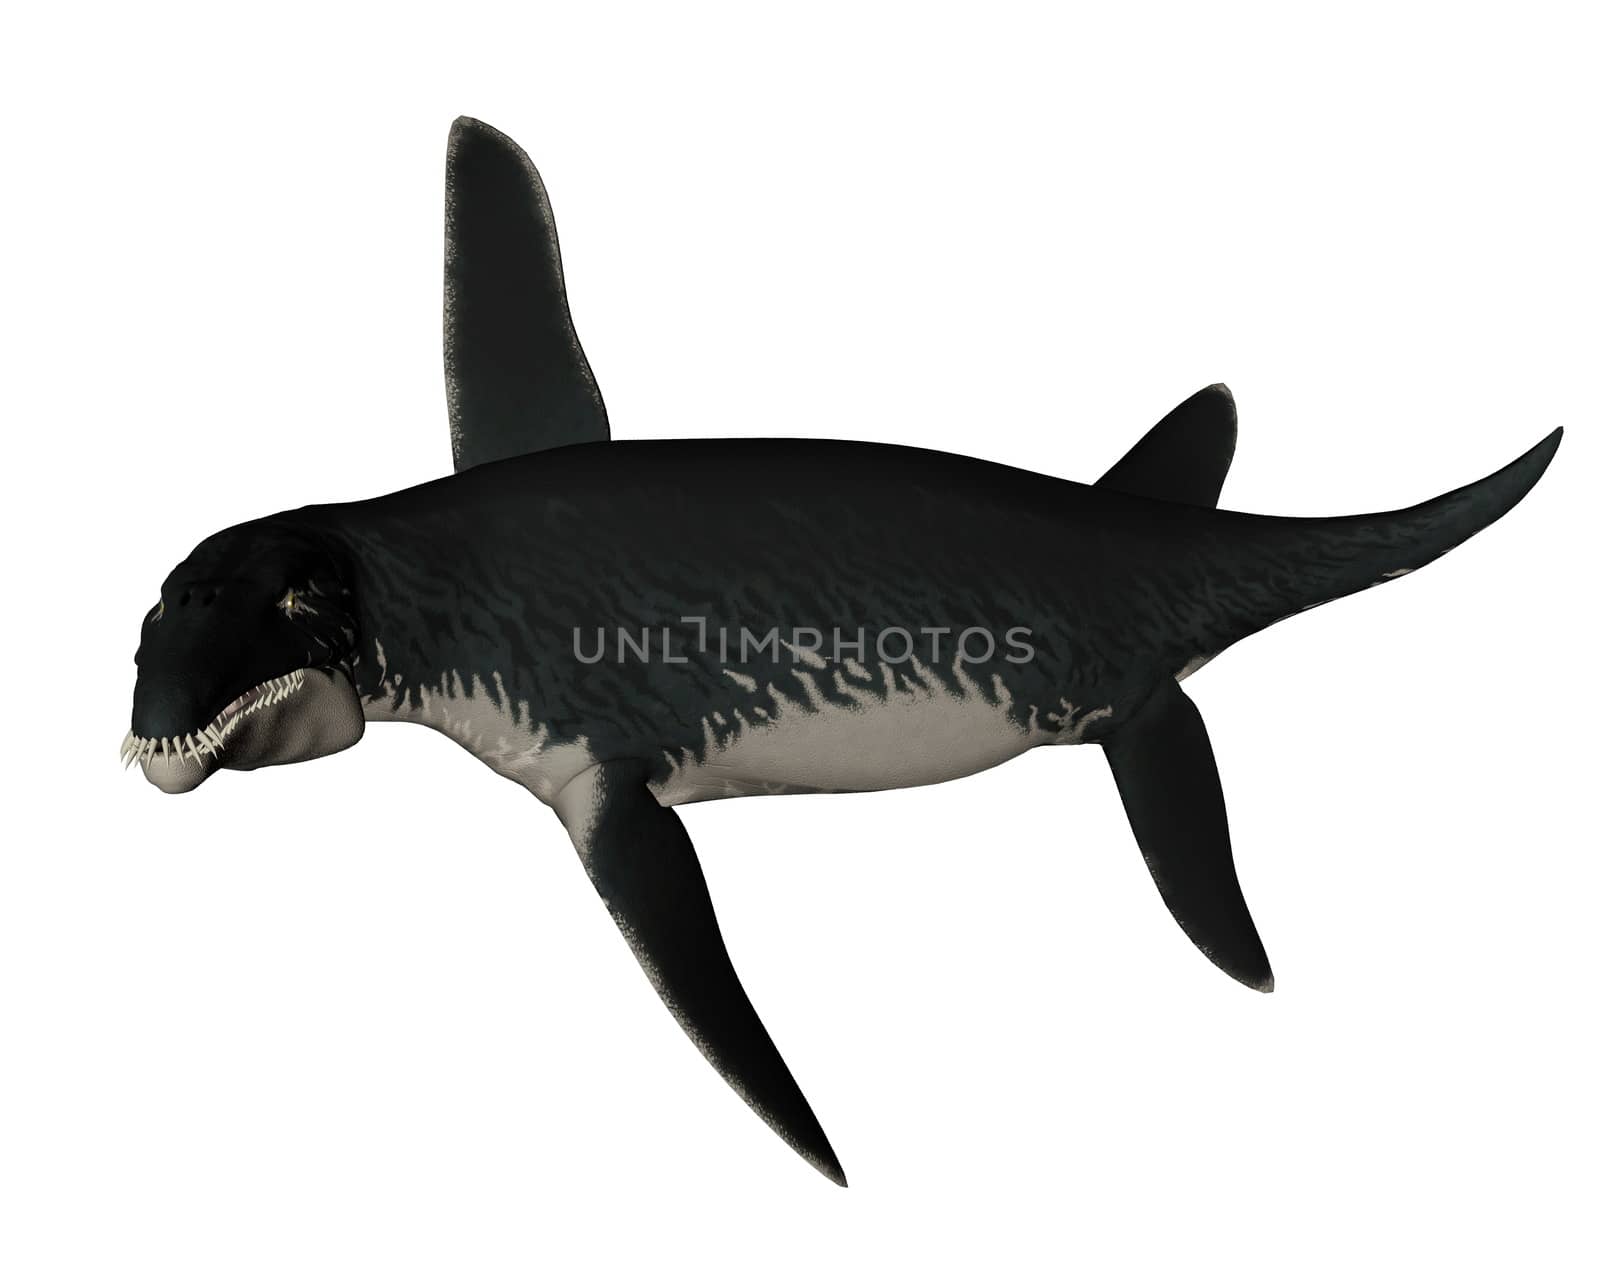 Liopleurodon prehistoric fish swooping isolated in white background - 3D render